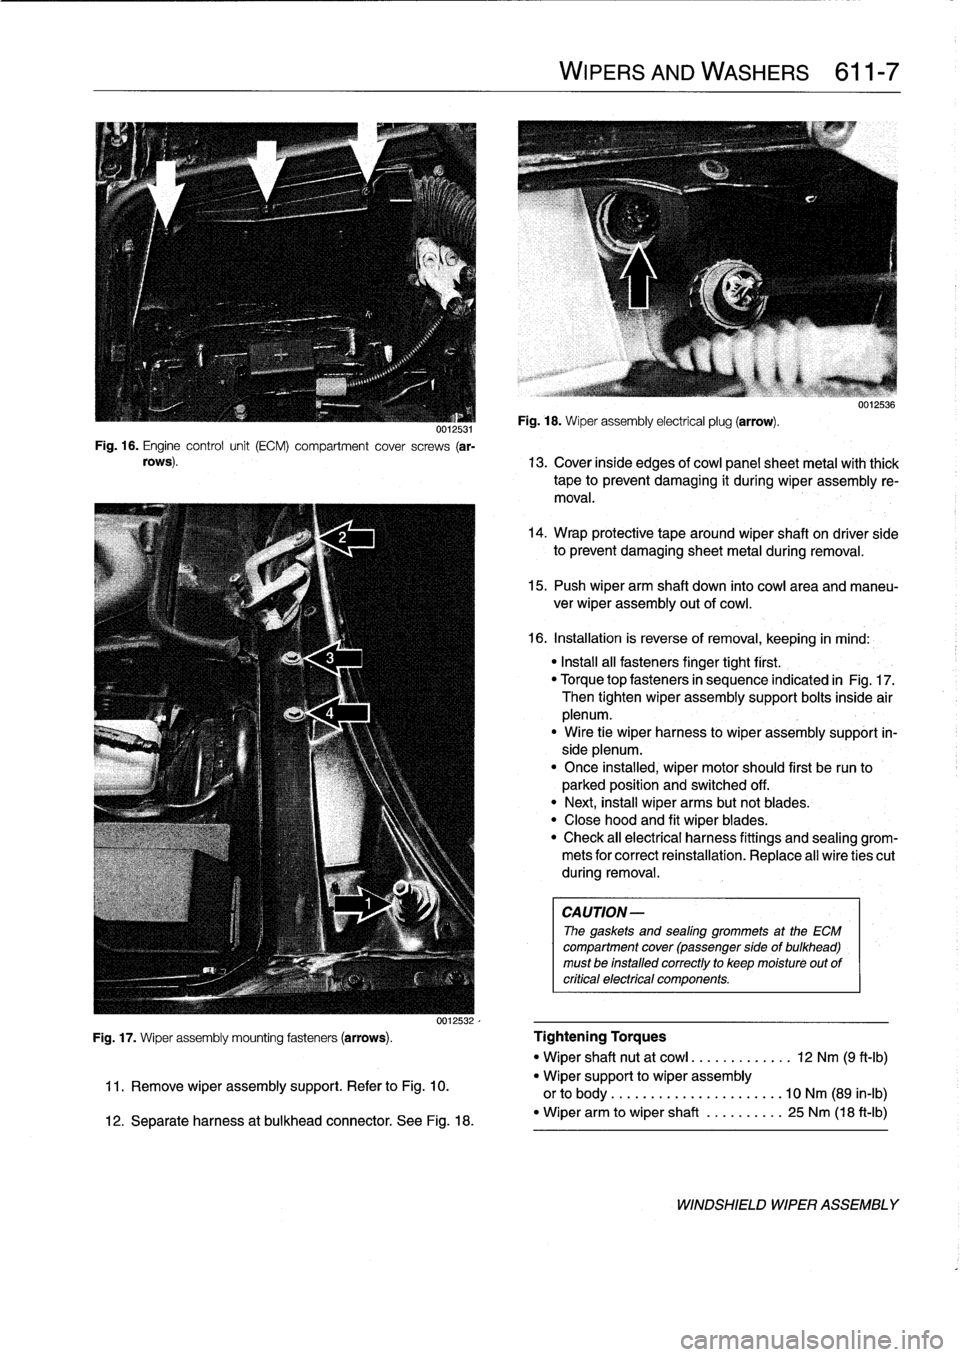 BMW M3 1998 E36 Workshop Manual 
0012531Fig
.
16
.
Engine
control
unit
(ECM)
compartment
cover
screws
(ar-
rows)
.

WIPERS
AND
WASHERS

	

611-
7

Fig
.
18
.
Wiper
assembly
electrical
plug
(arrow)
.

uu1zbs6

13
.
Cover
inside
edges